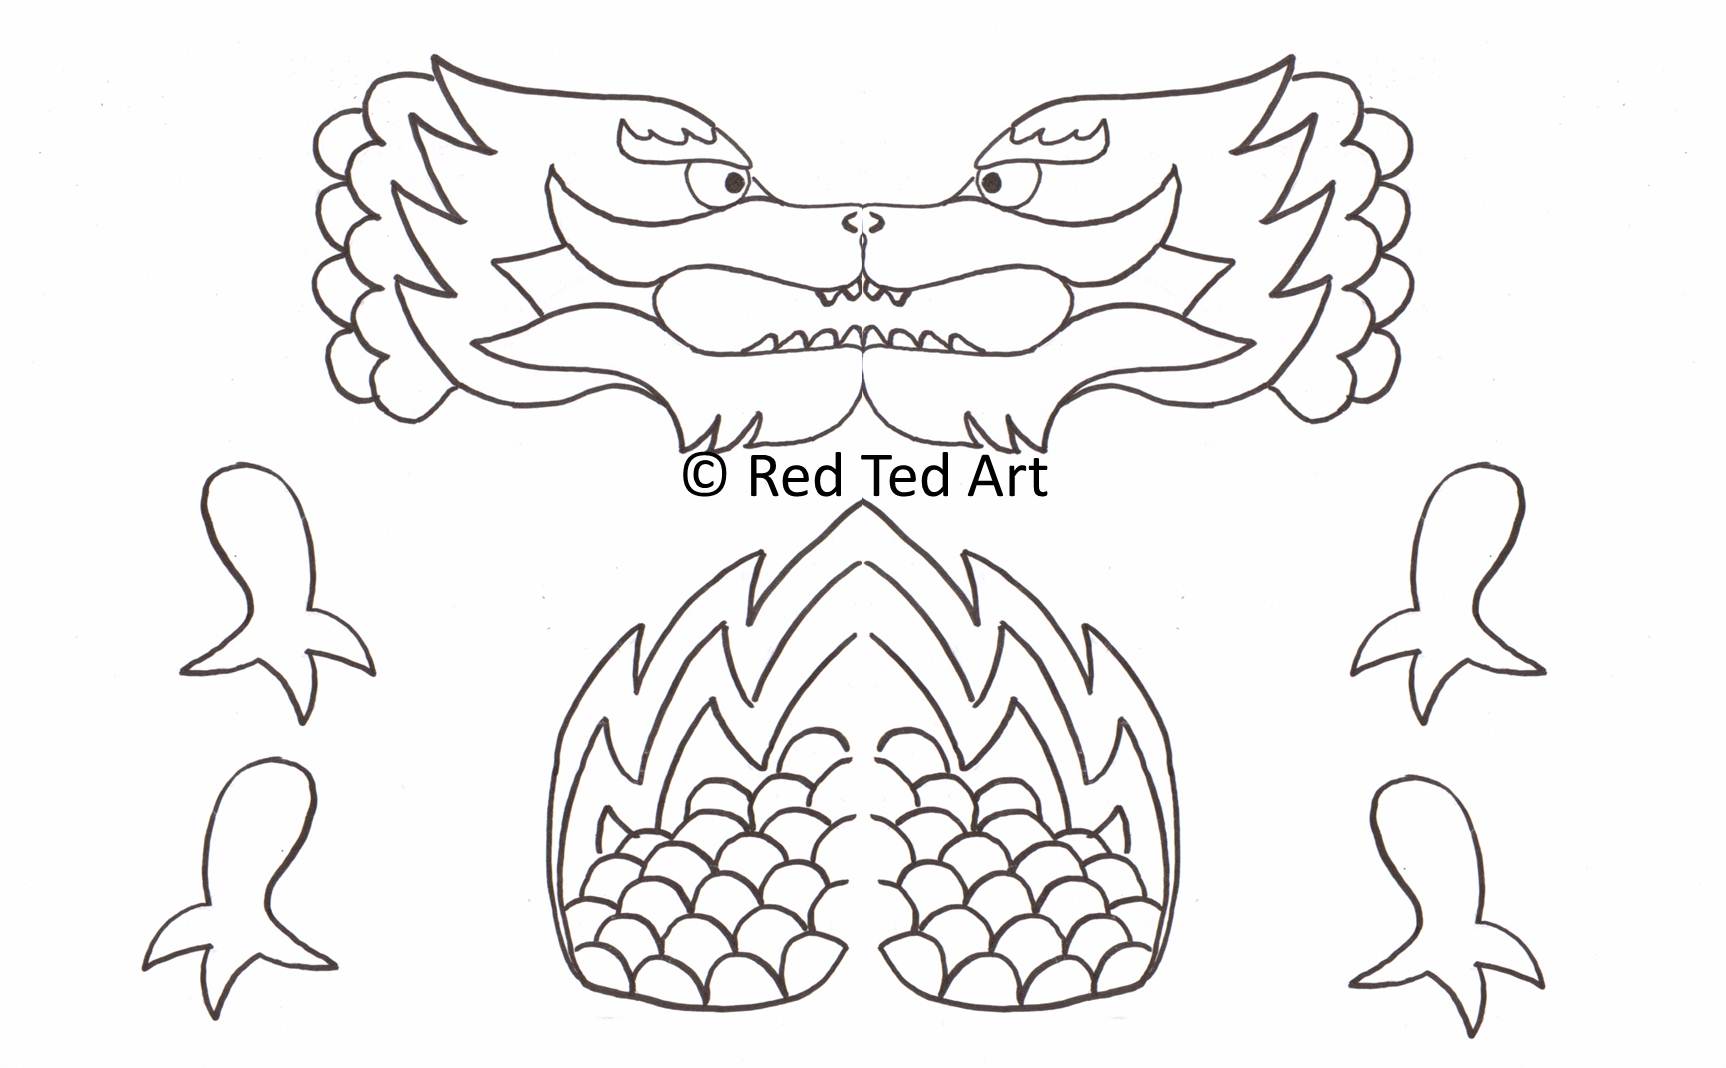 Free Printable Chinese Dragon Templates You Will Discover A Variety Of Printable Types For Binders Structures And Institution Such As Children Spaces Web Templates And Wall Structure Artwork Free To Your